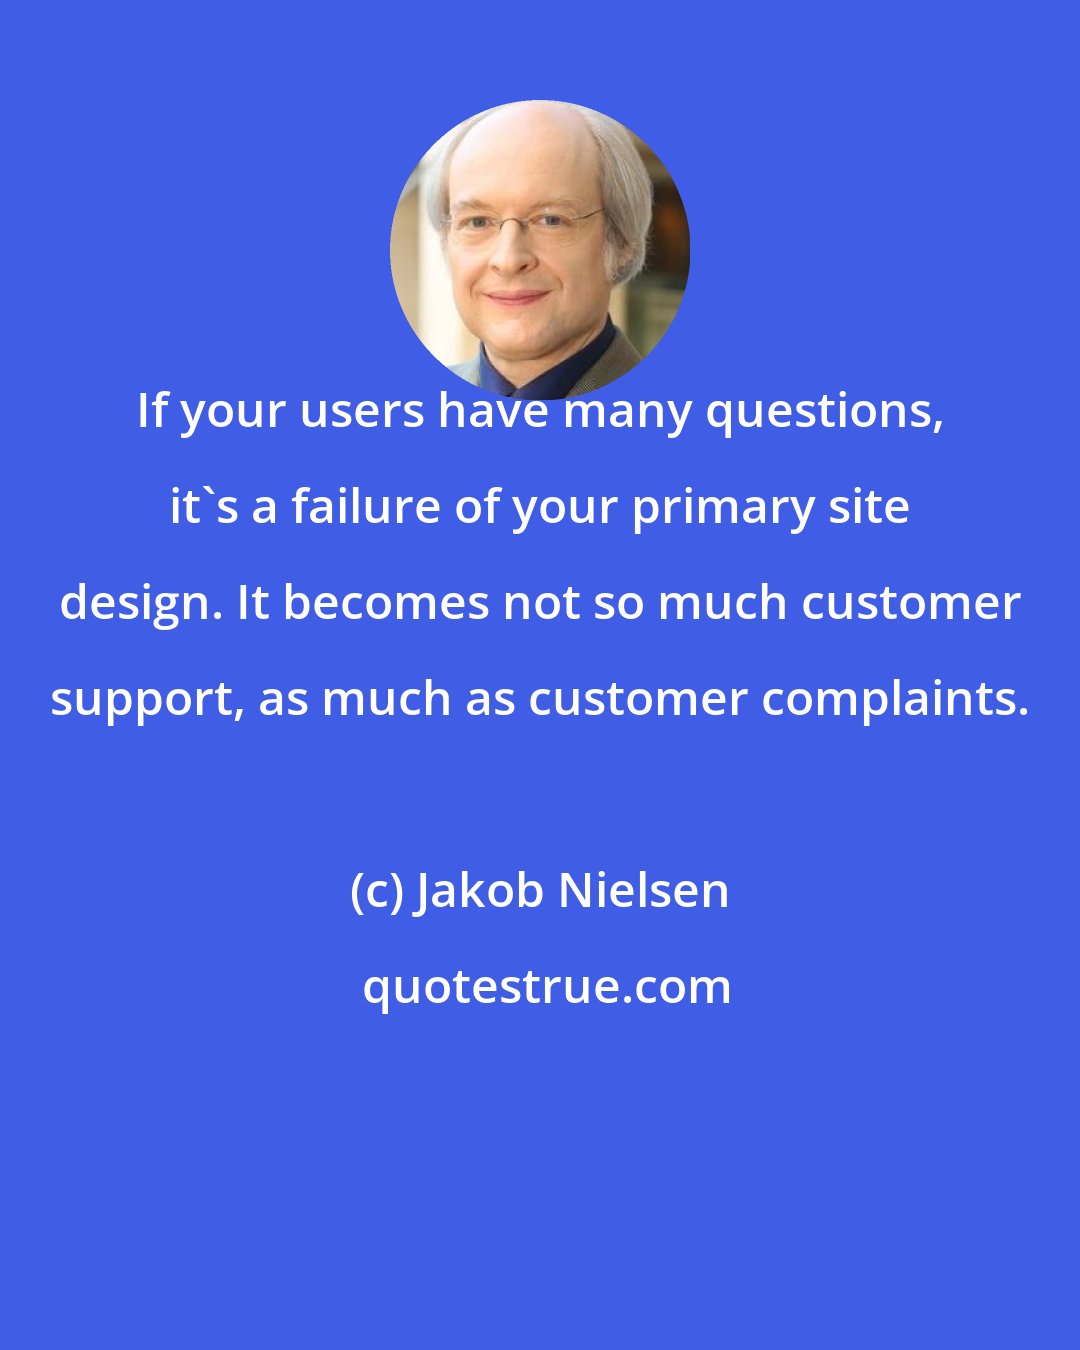 Jakob Nielsen: If your users have many questions, it's a failure of your primary site design. It becomes not so much customer support, as much as customer complaints.